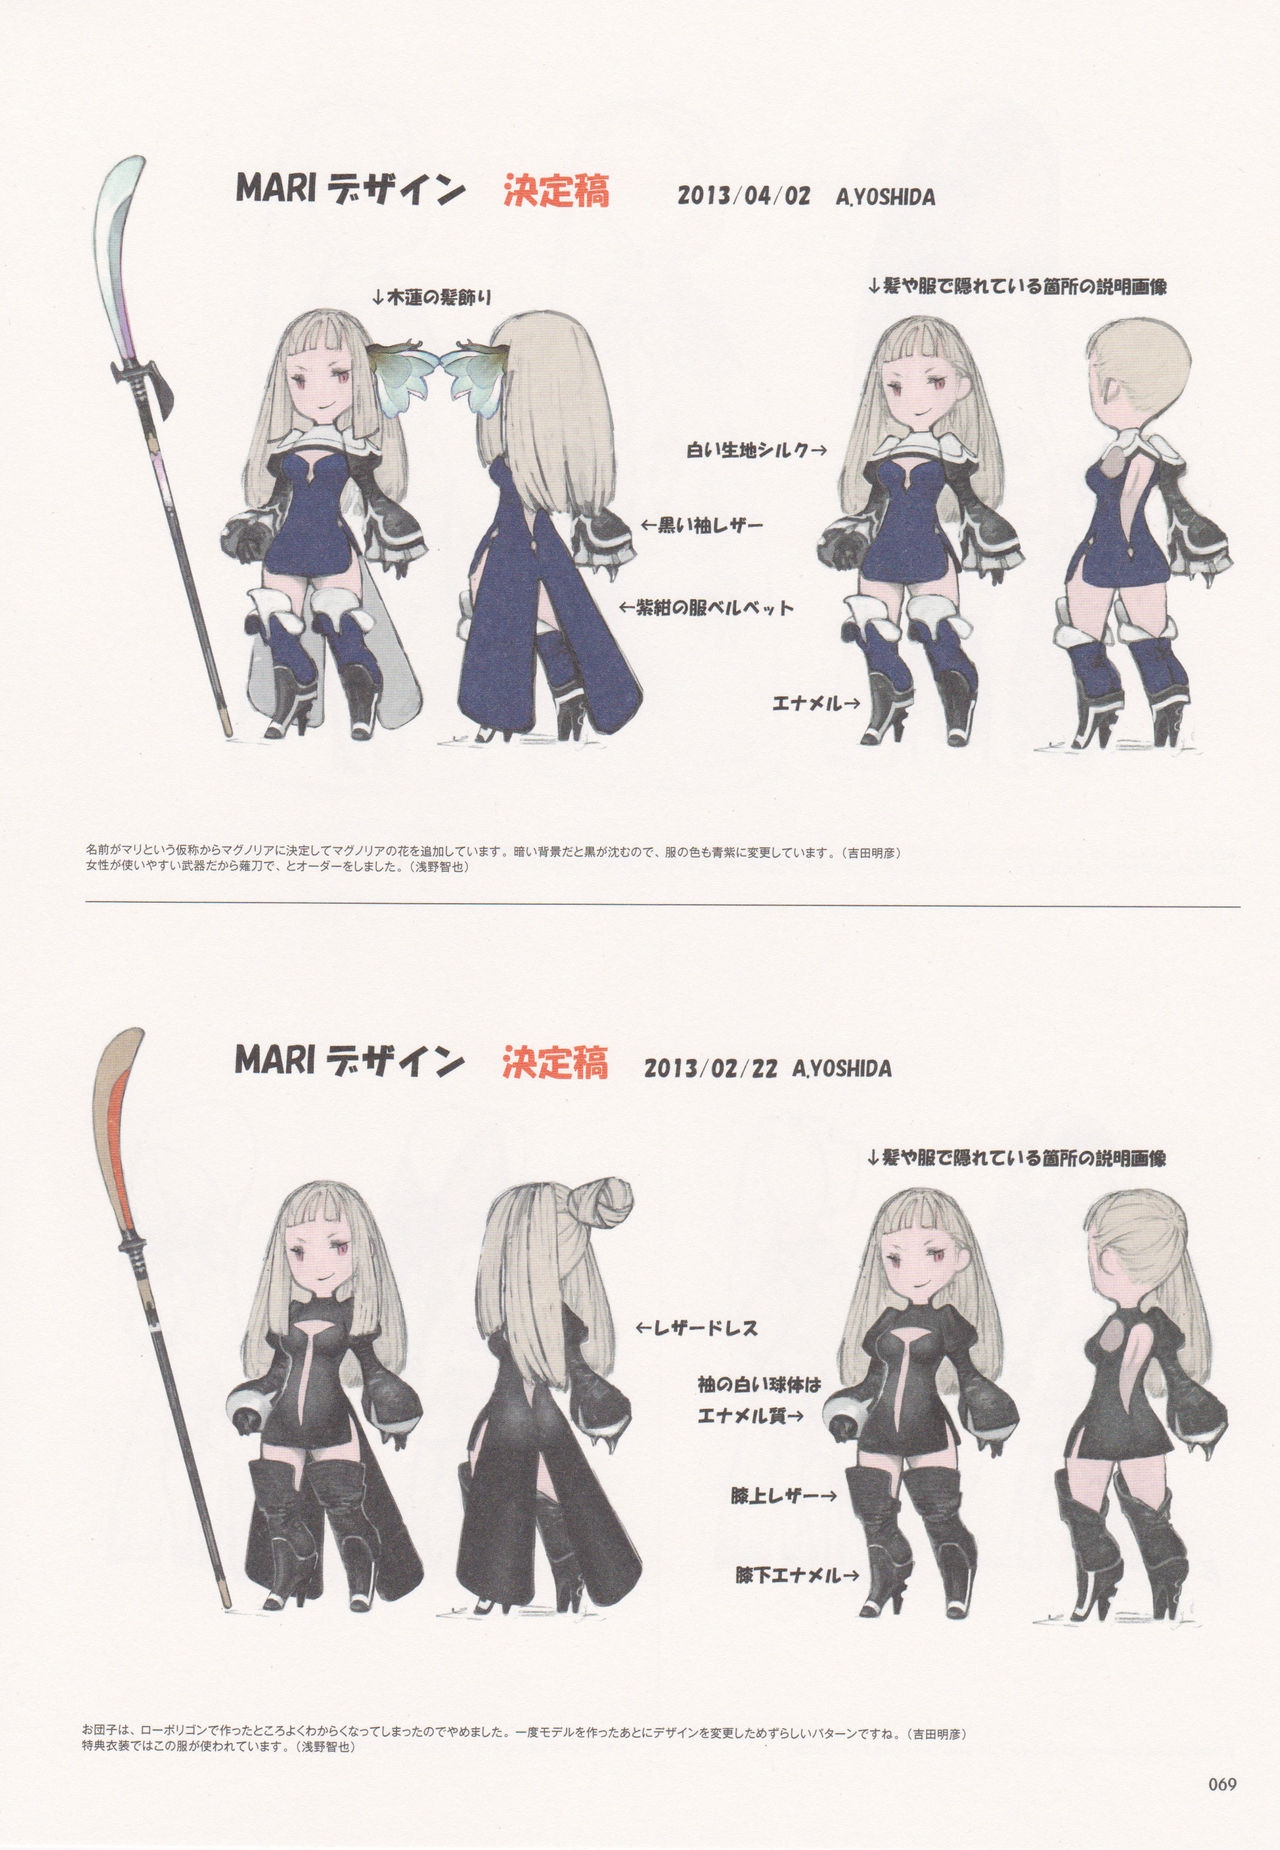 Bravely Second - End Layer - Design Works THE ART OF BRAVELY 2013-2015 69